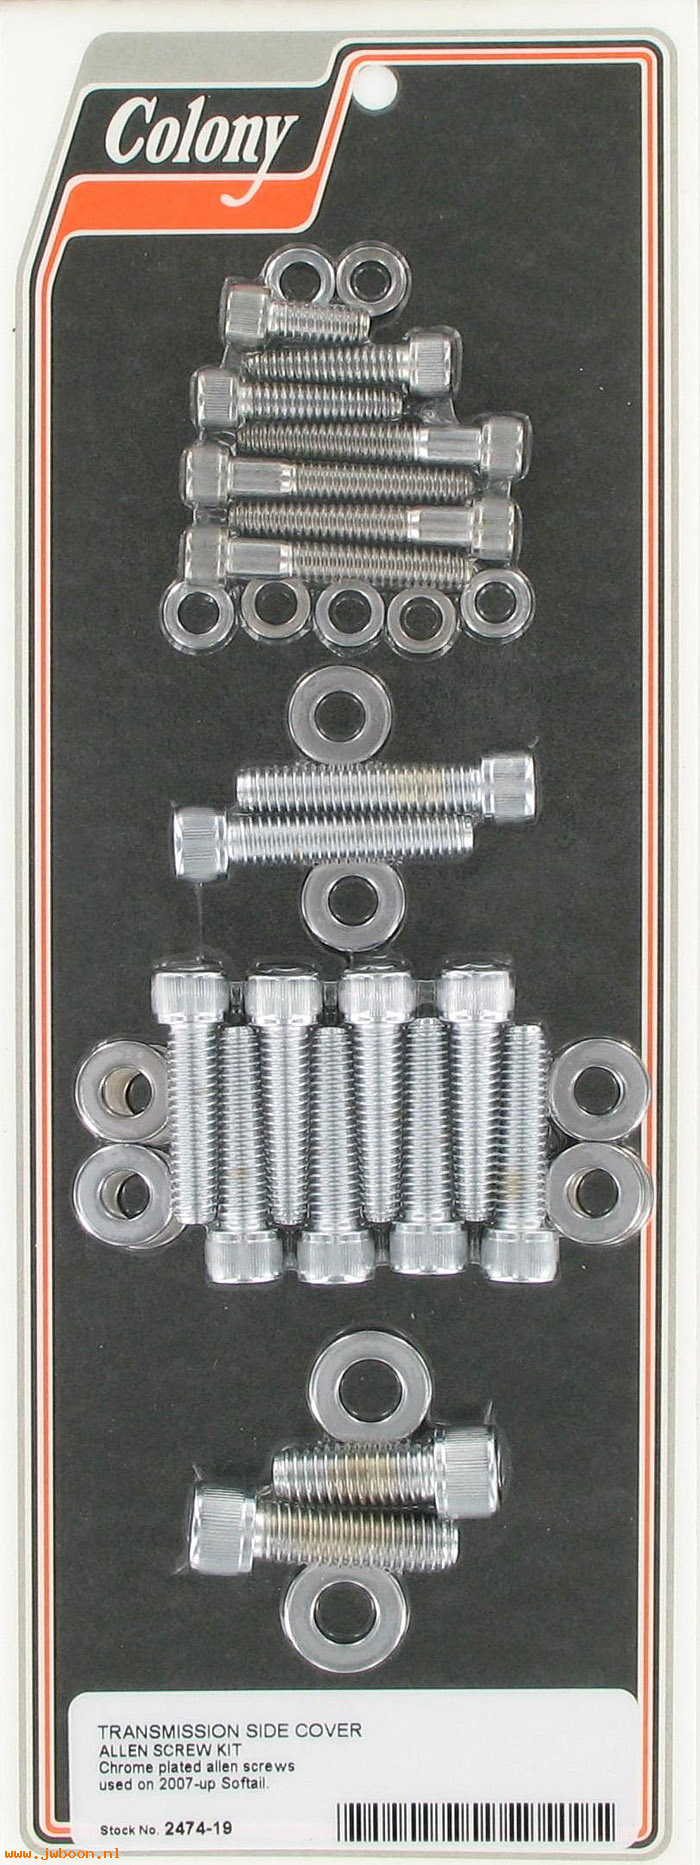 C 2474-19 (): Transmission side cover screws - Allen, in stock - Softail '07-